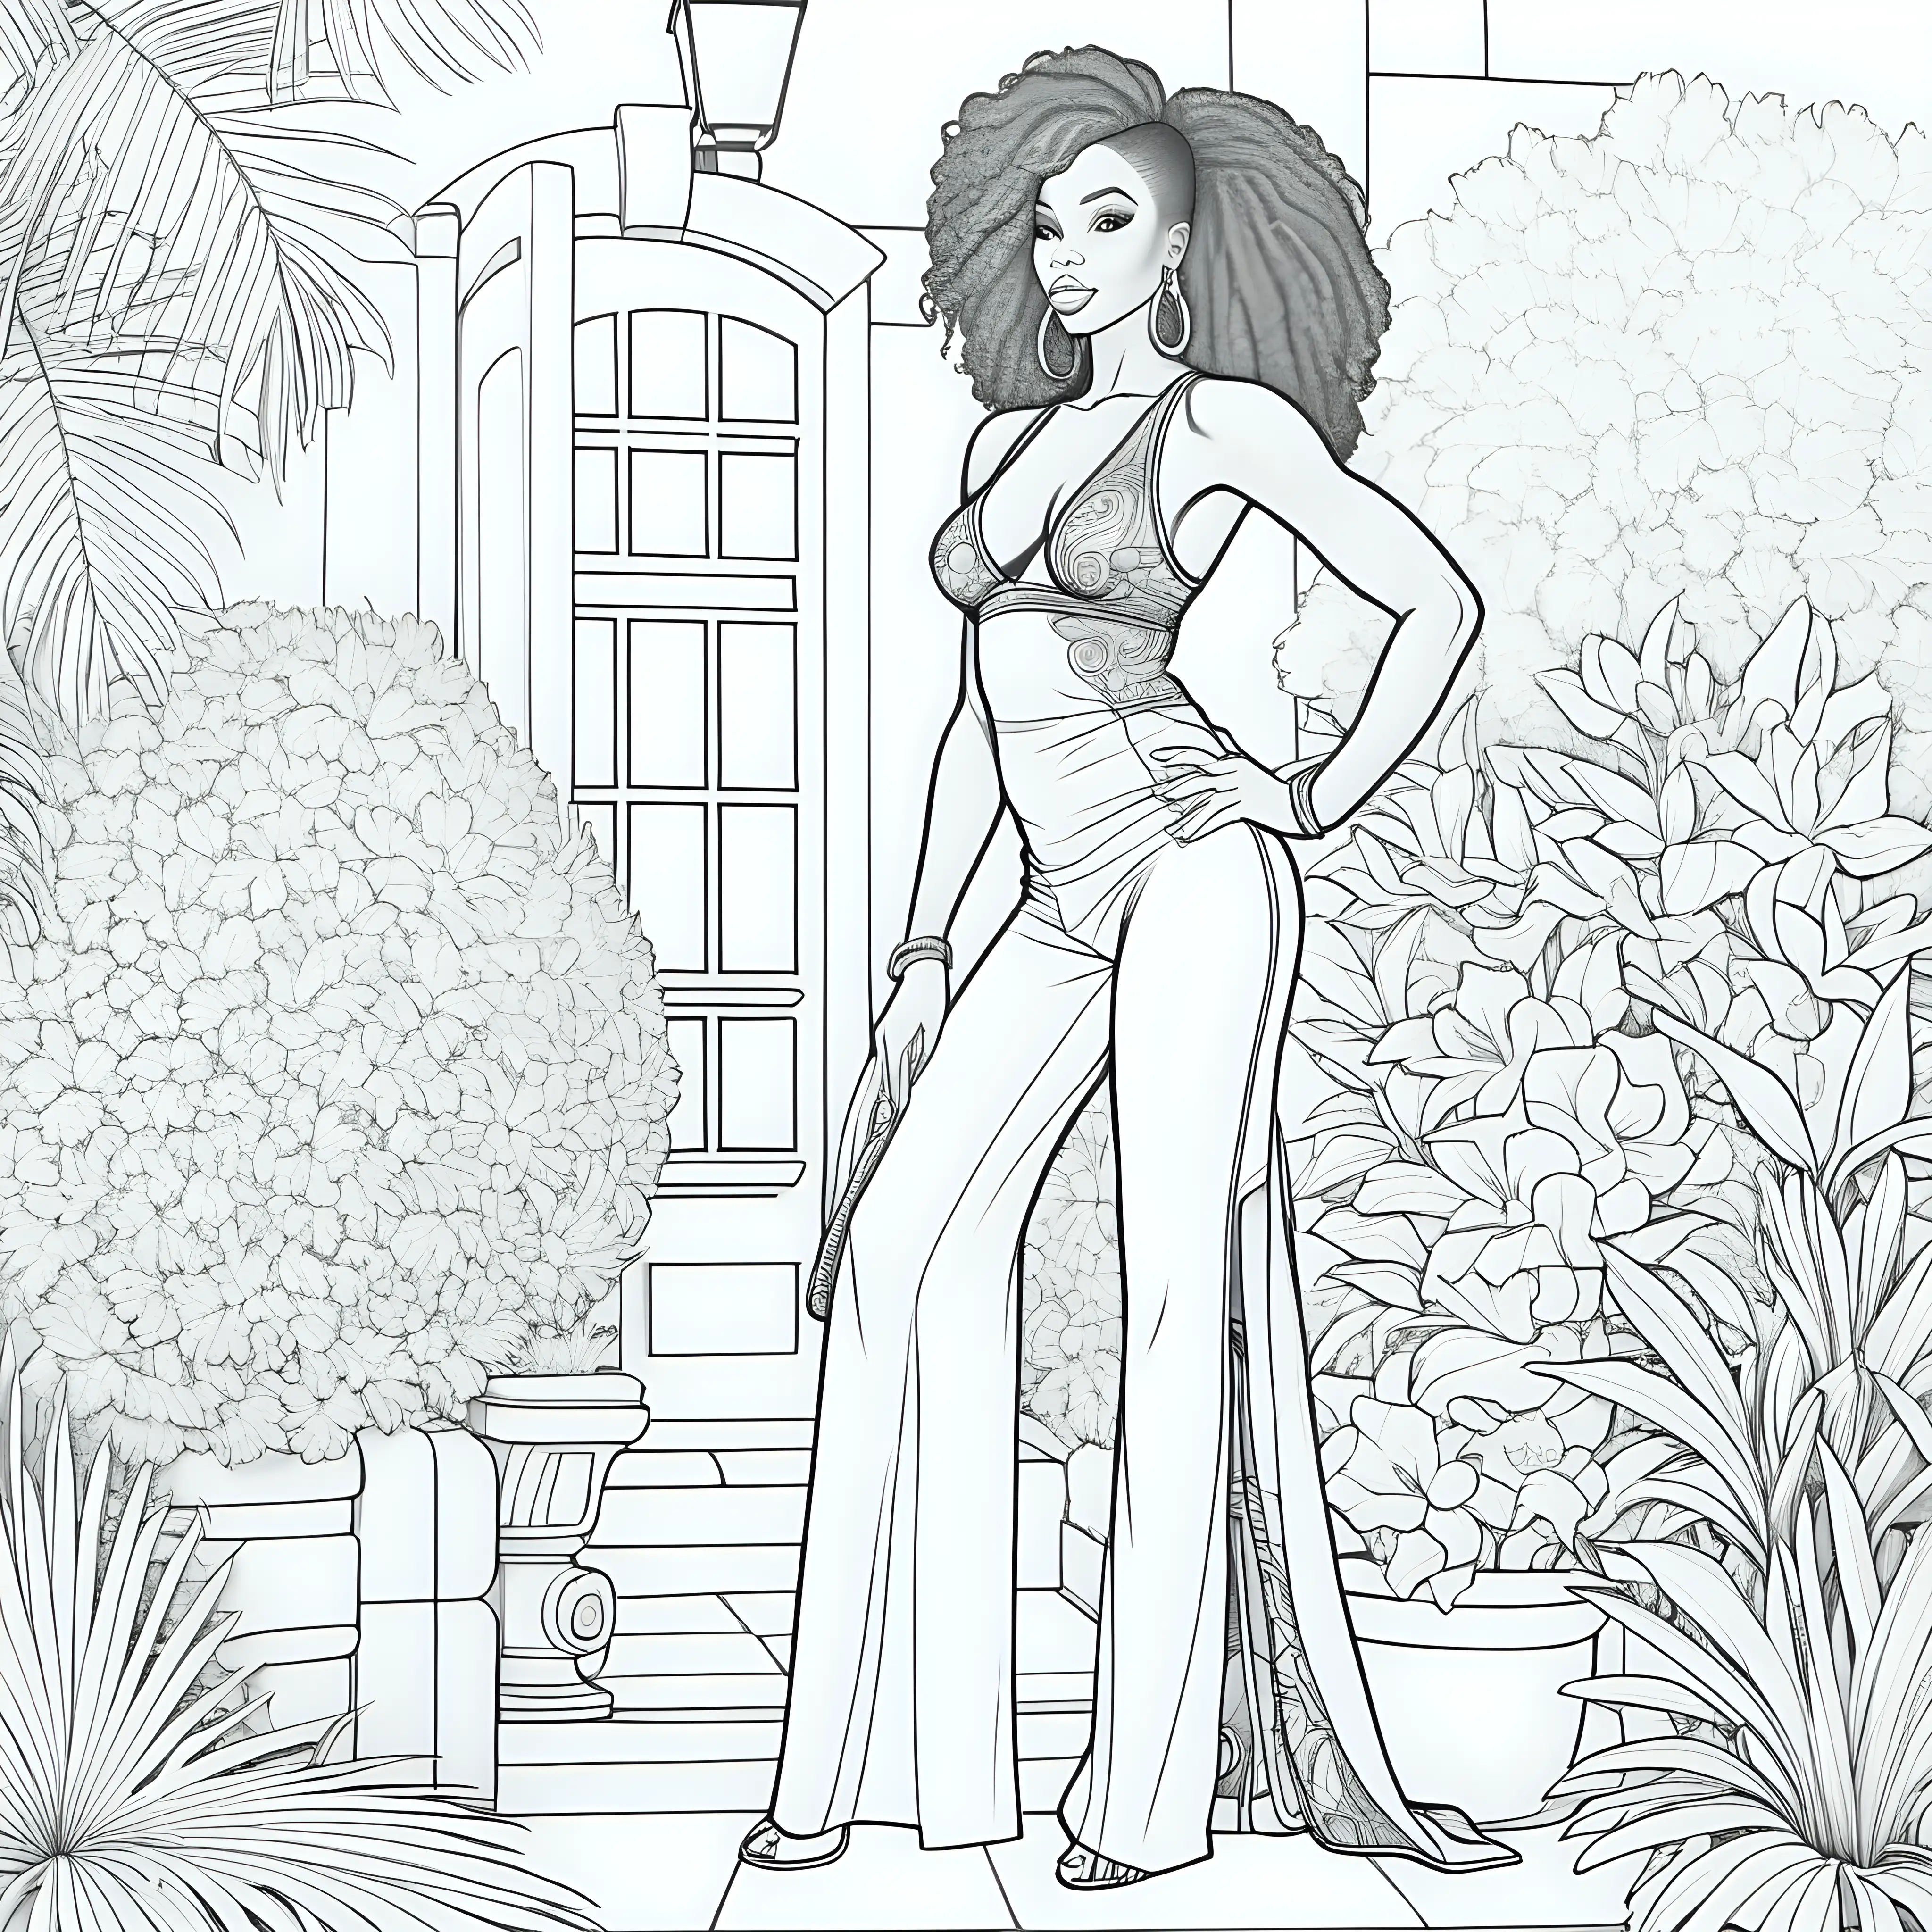 adult coloring book, outline image, no greyscale, no color, no shading,  outline hair only, coloring page style, african american woman, full body pose, sexy fully dressed, designer clothes, fun outside backgrounds, coloring book lines